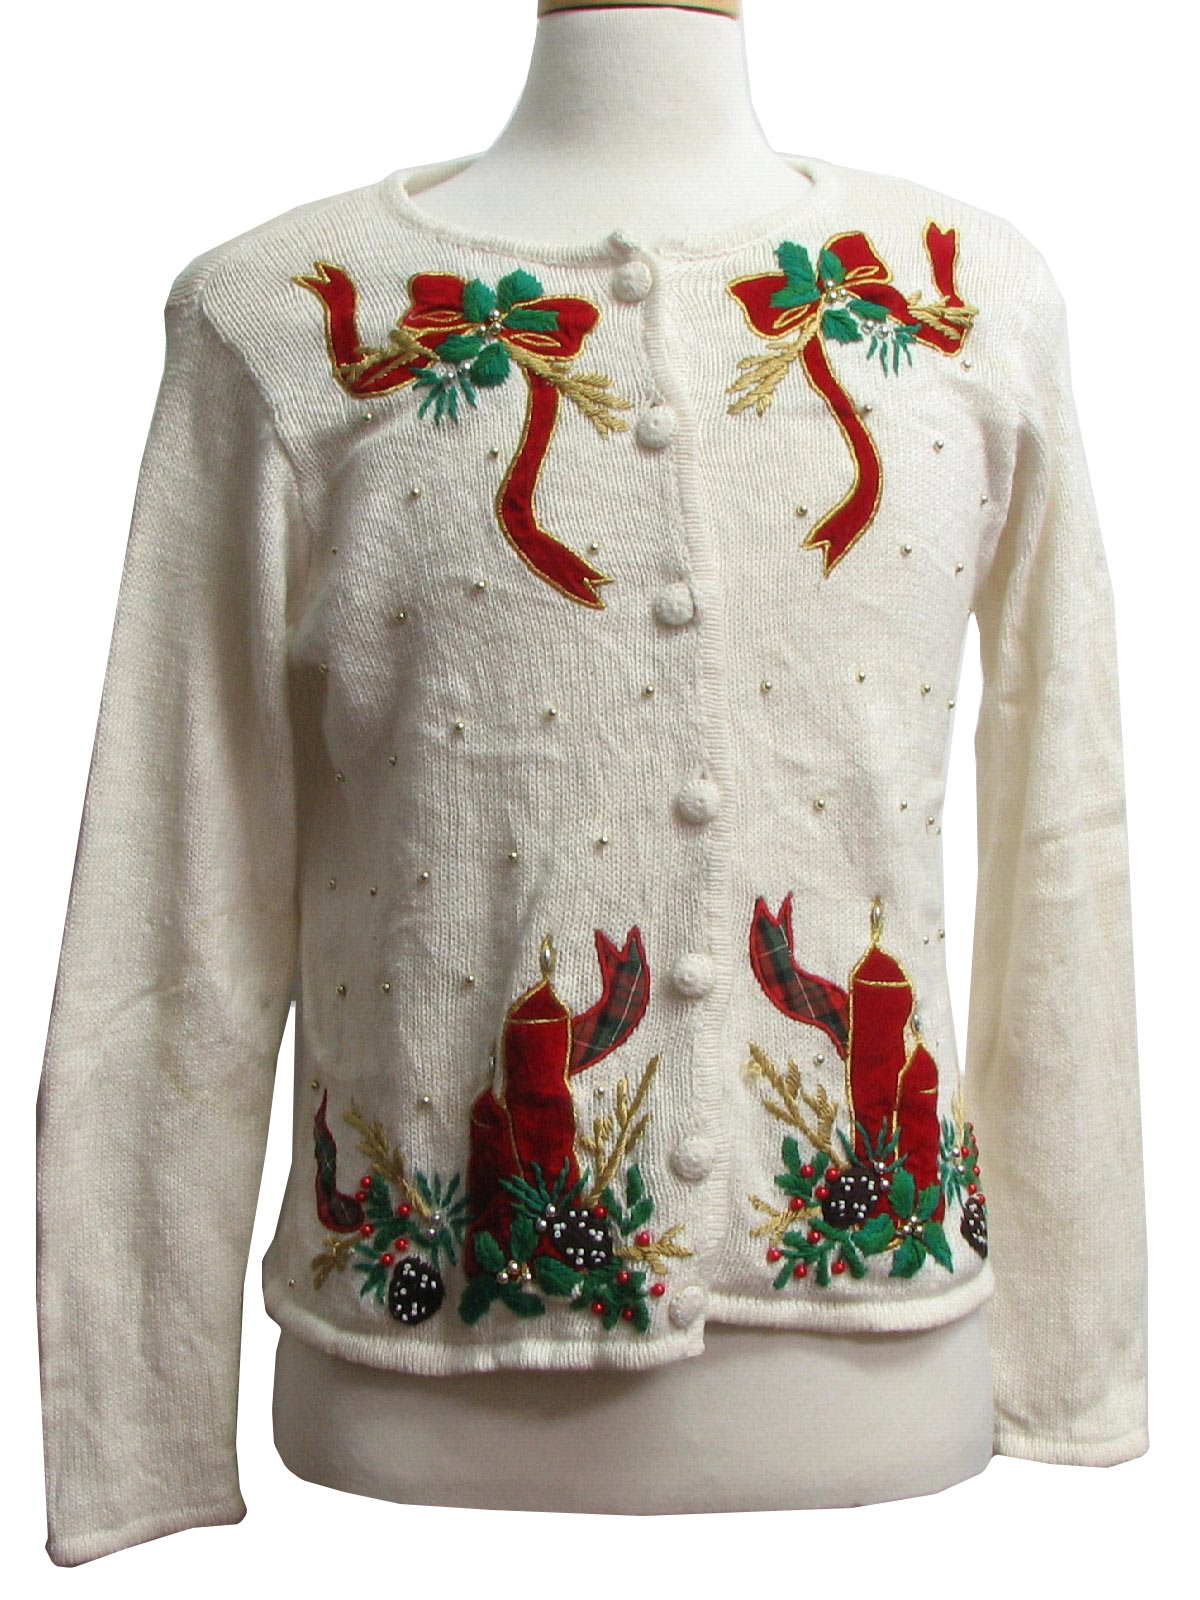 Womens Ugly Christmas Sweater: -Studio Collection- Womens cream ...